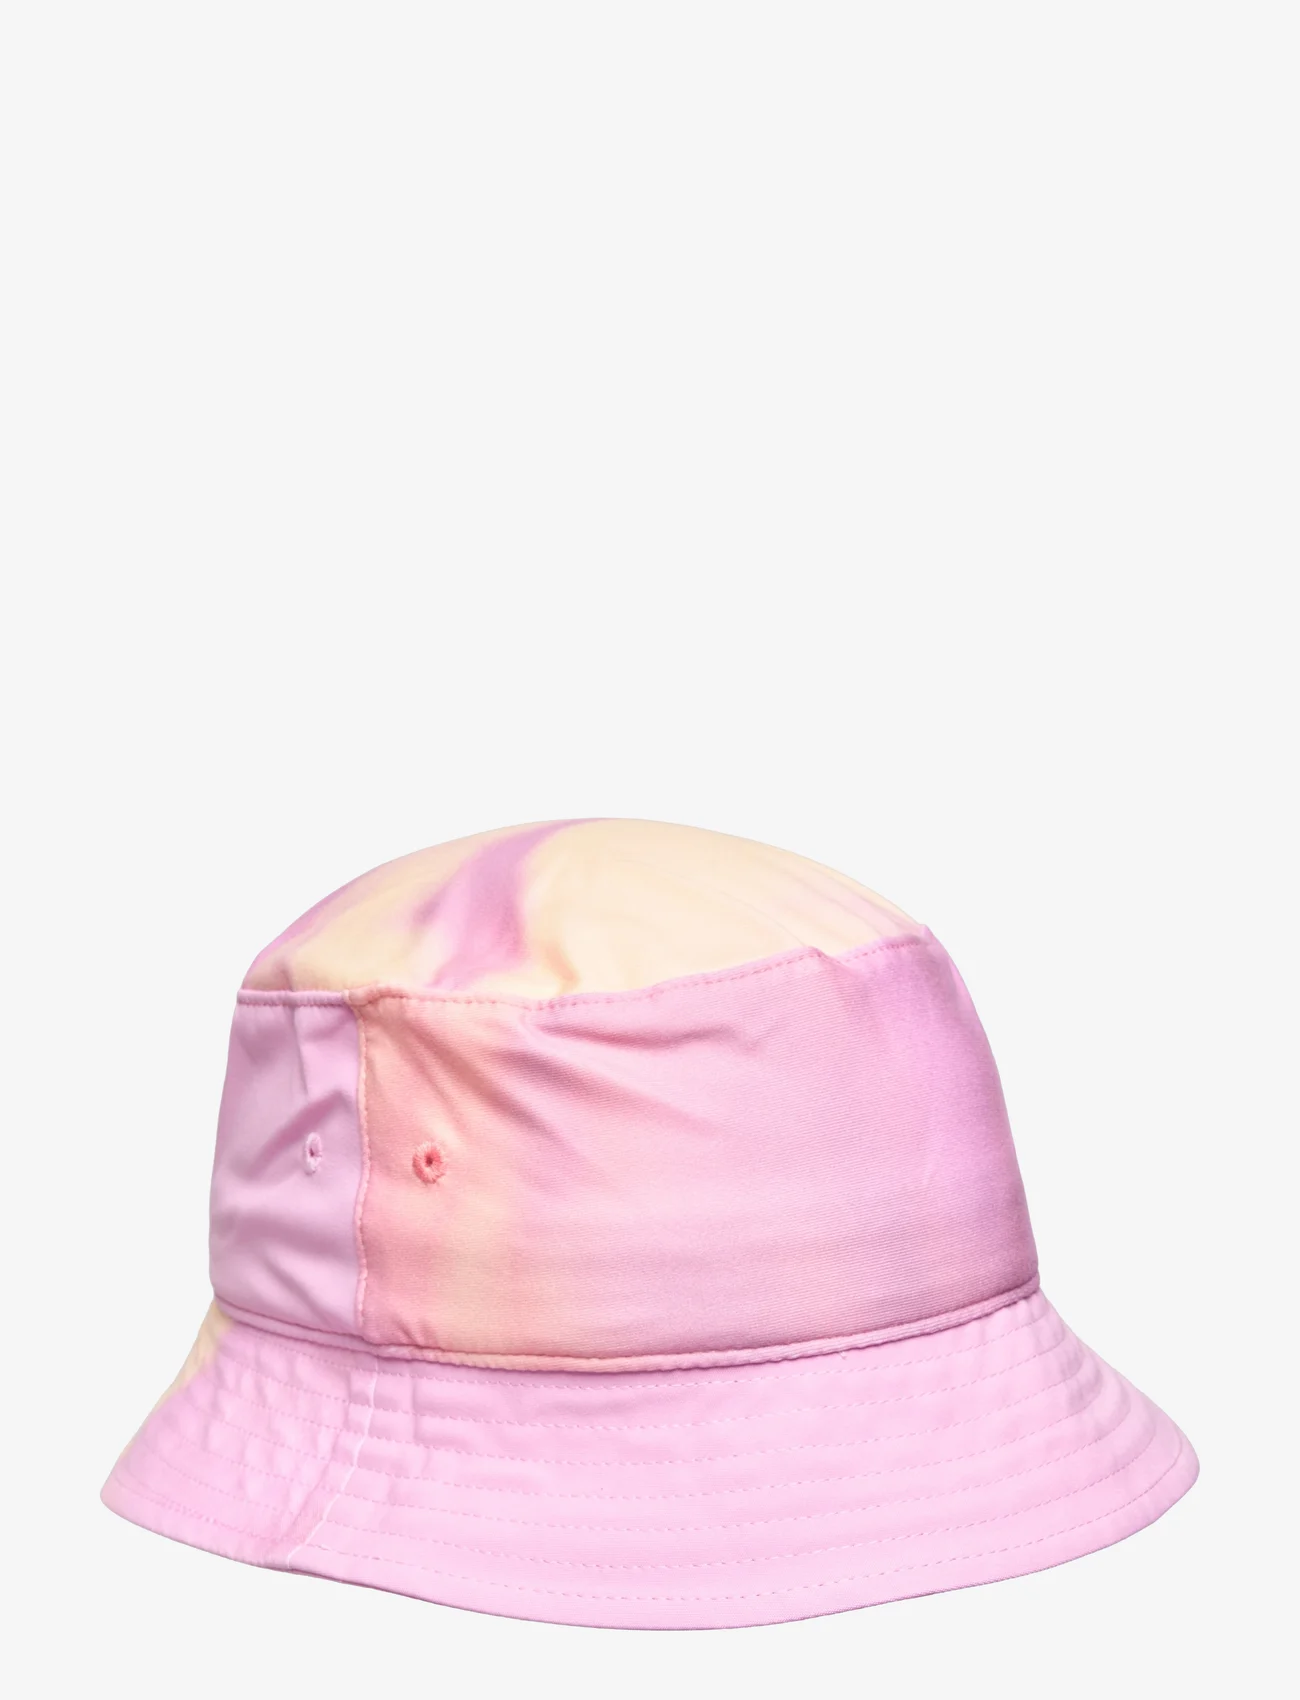 Columbia Sportswear - Columbia Youth Bucket Hat - pipot - salmon rose undercurrent, cosmos - 0